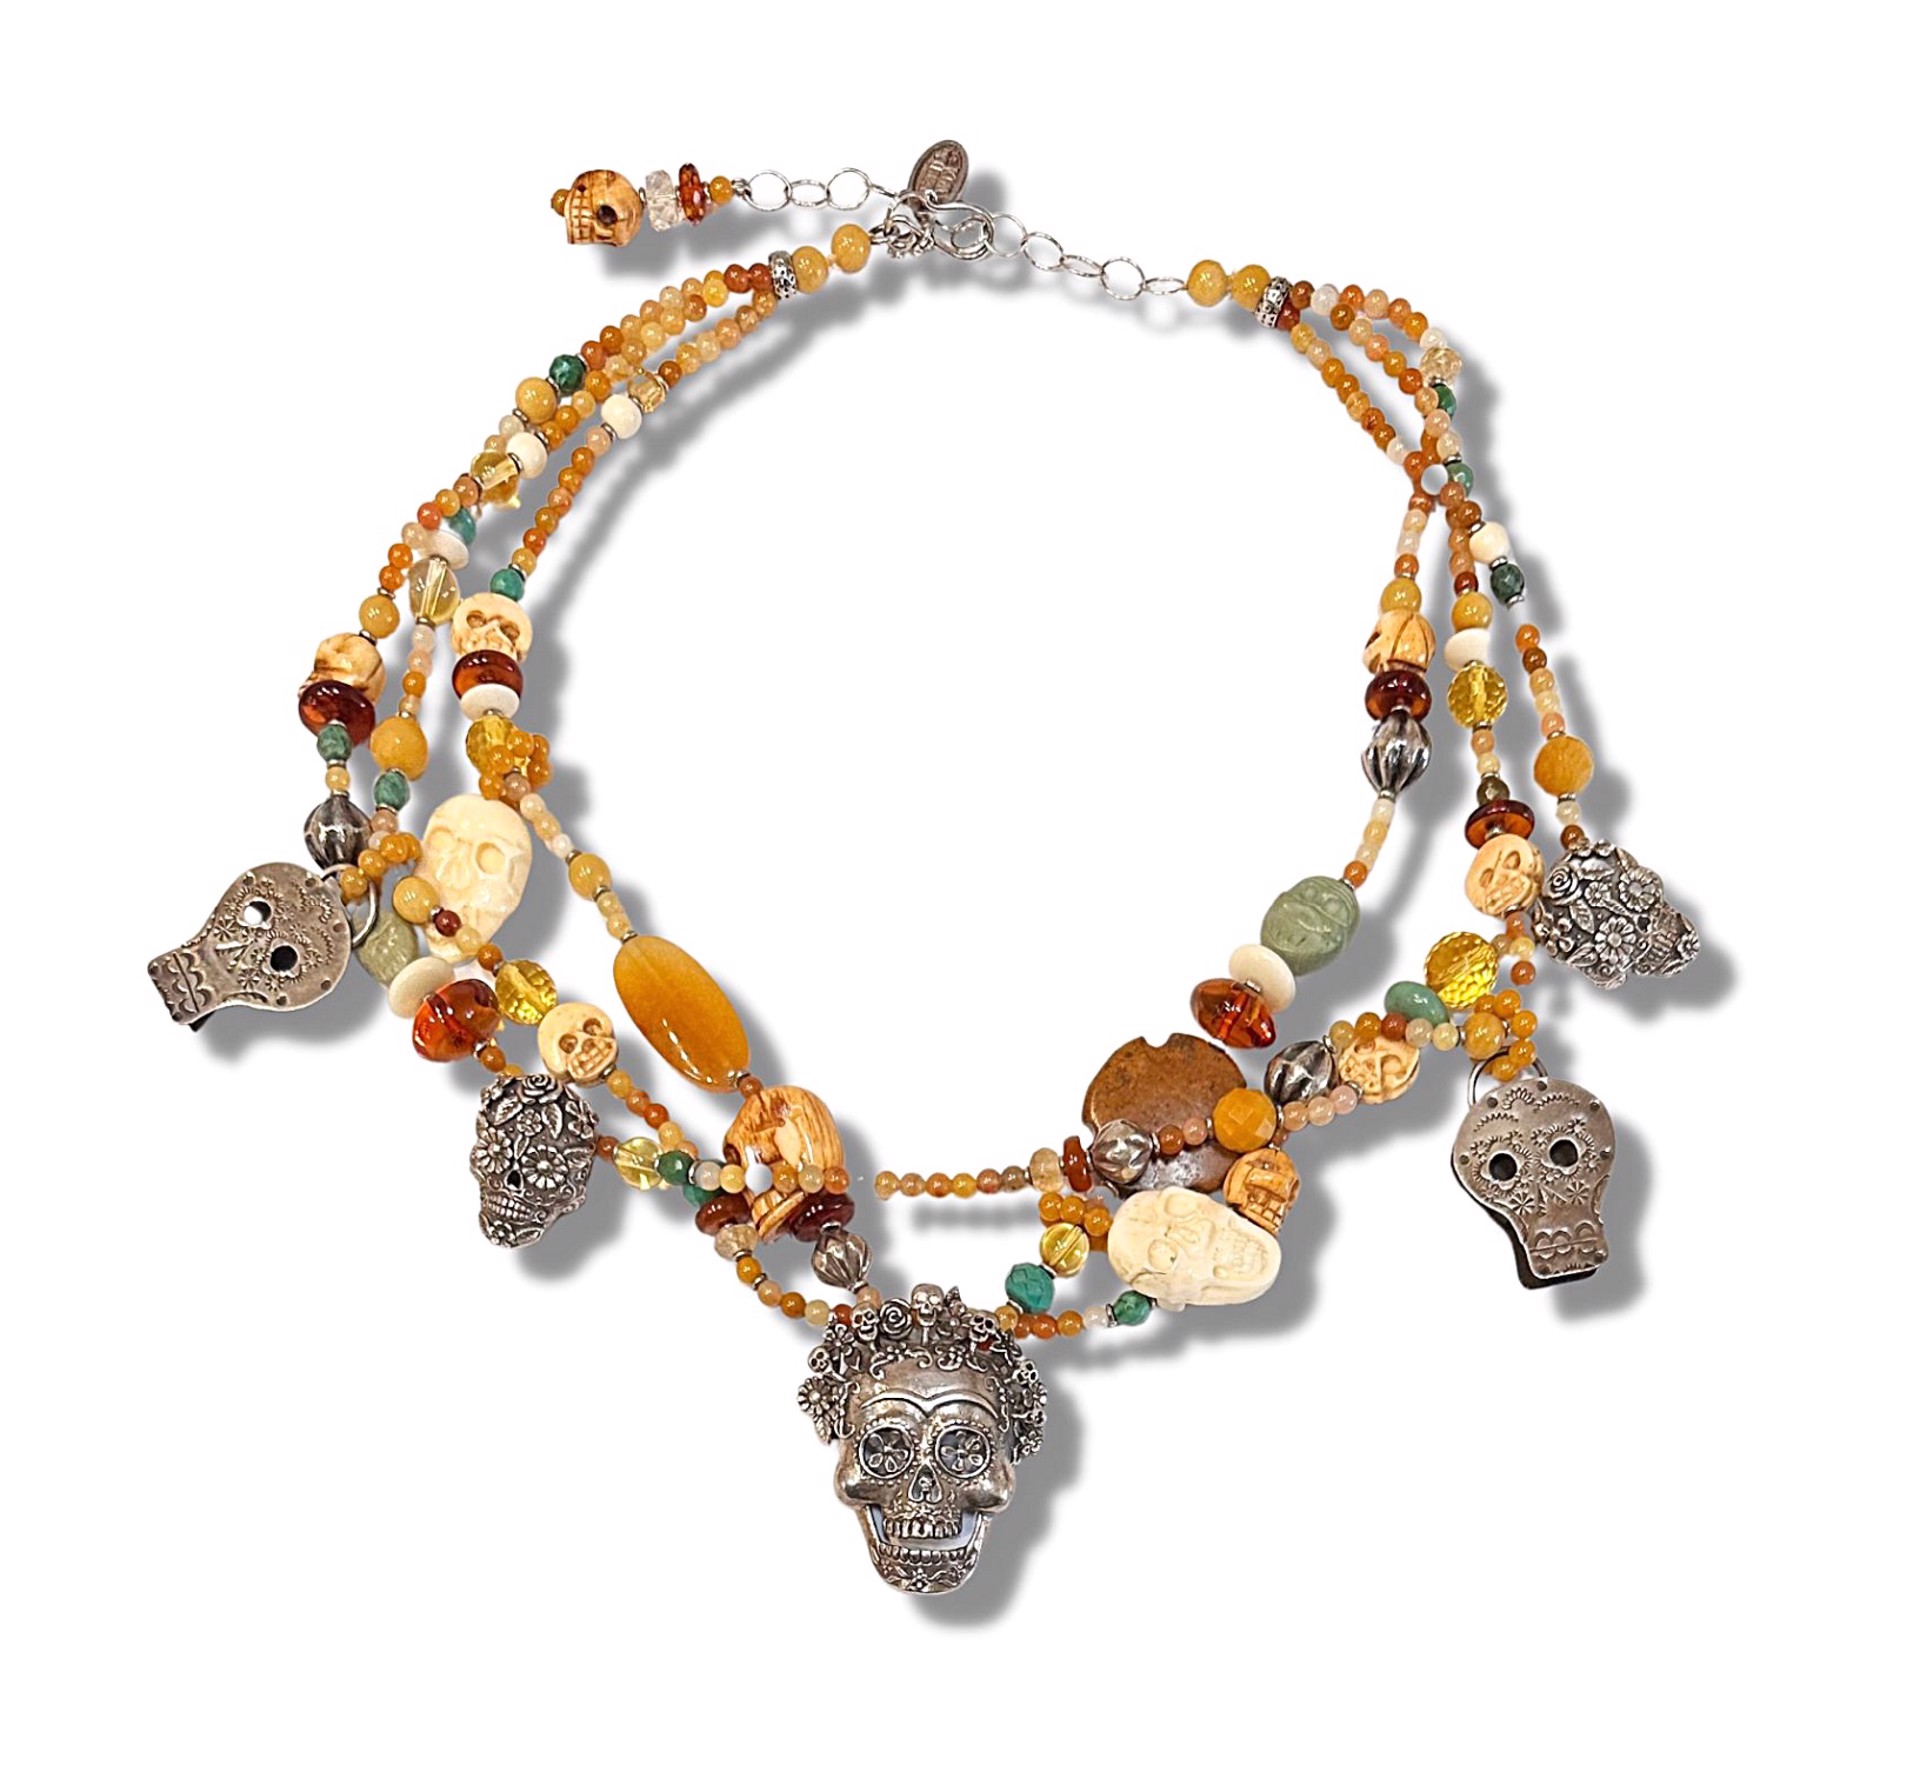 Necklace - 3 Strand Day of the Dead with Sterling Skull Charms #175 by Kim Yubeta